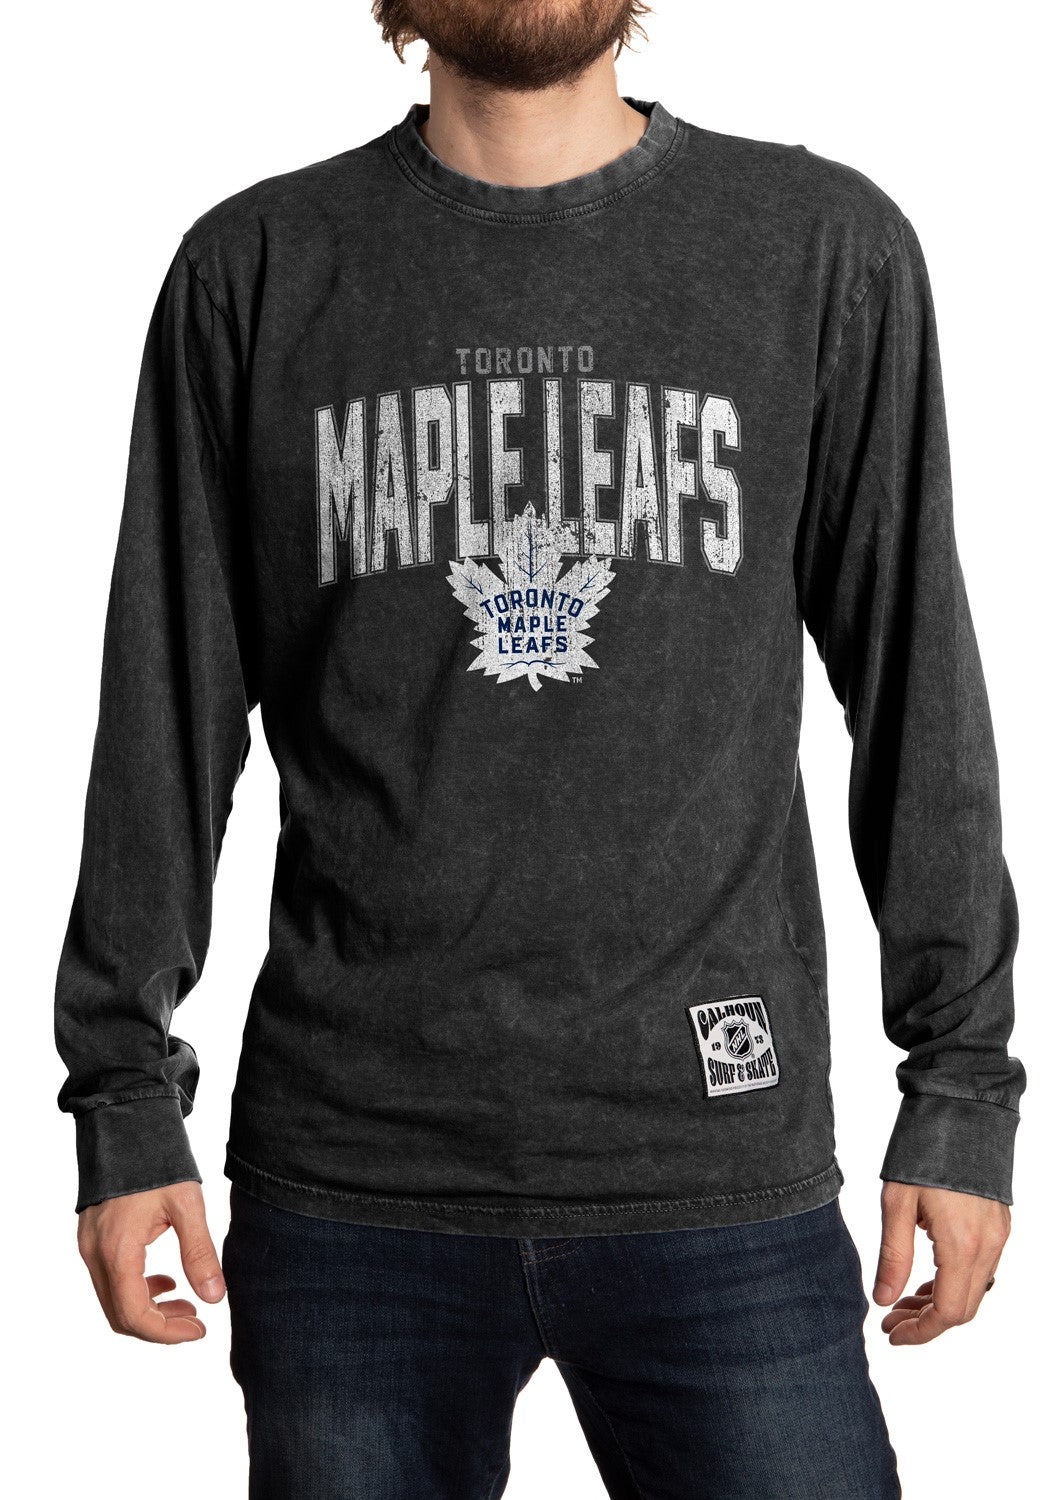 NHL Toronto Maple Leafs Special Halloween Concepts 3D Hoodie - Ecomhao Store